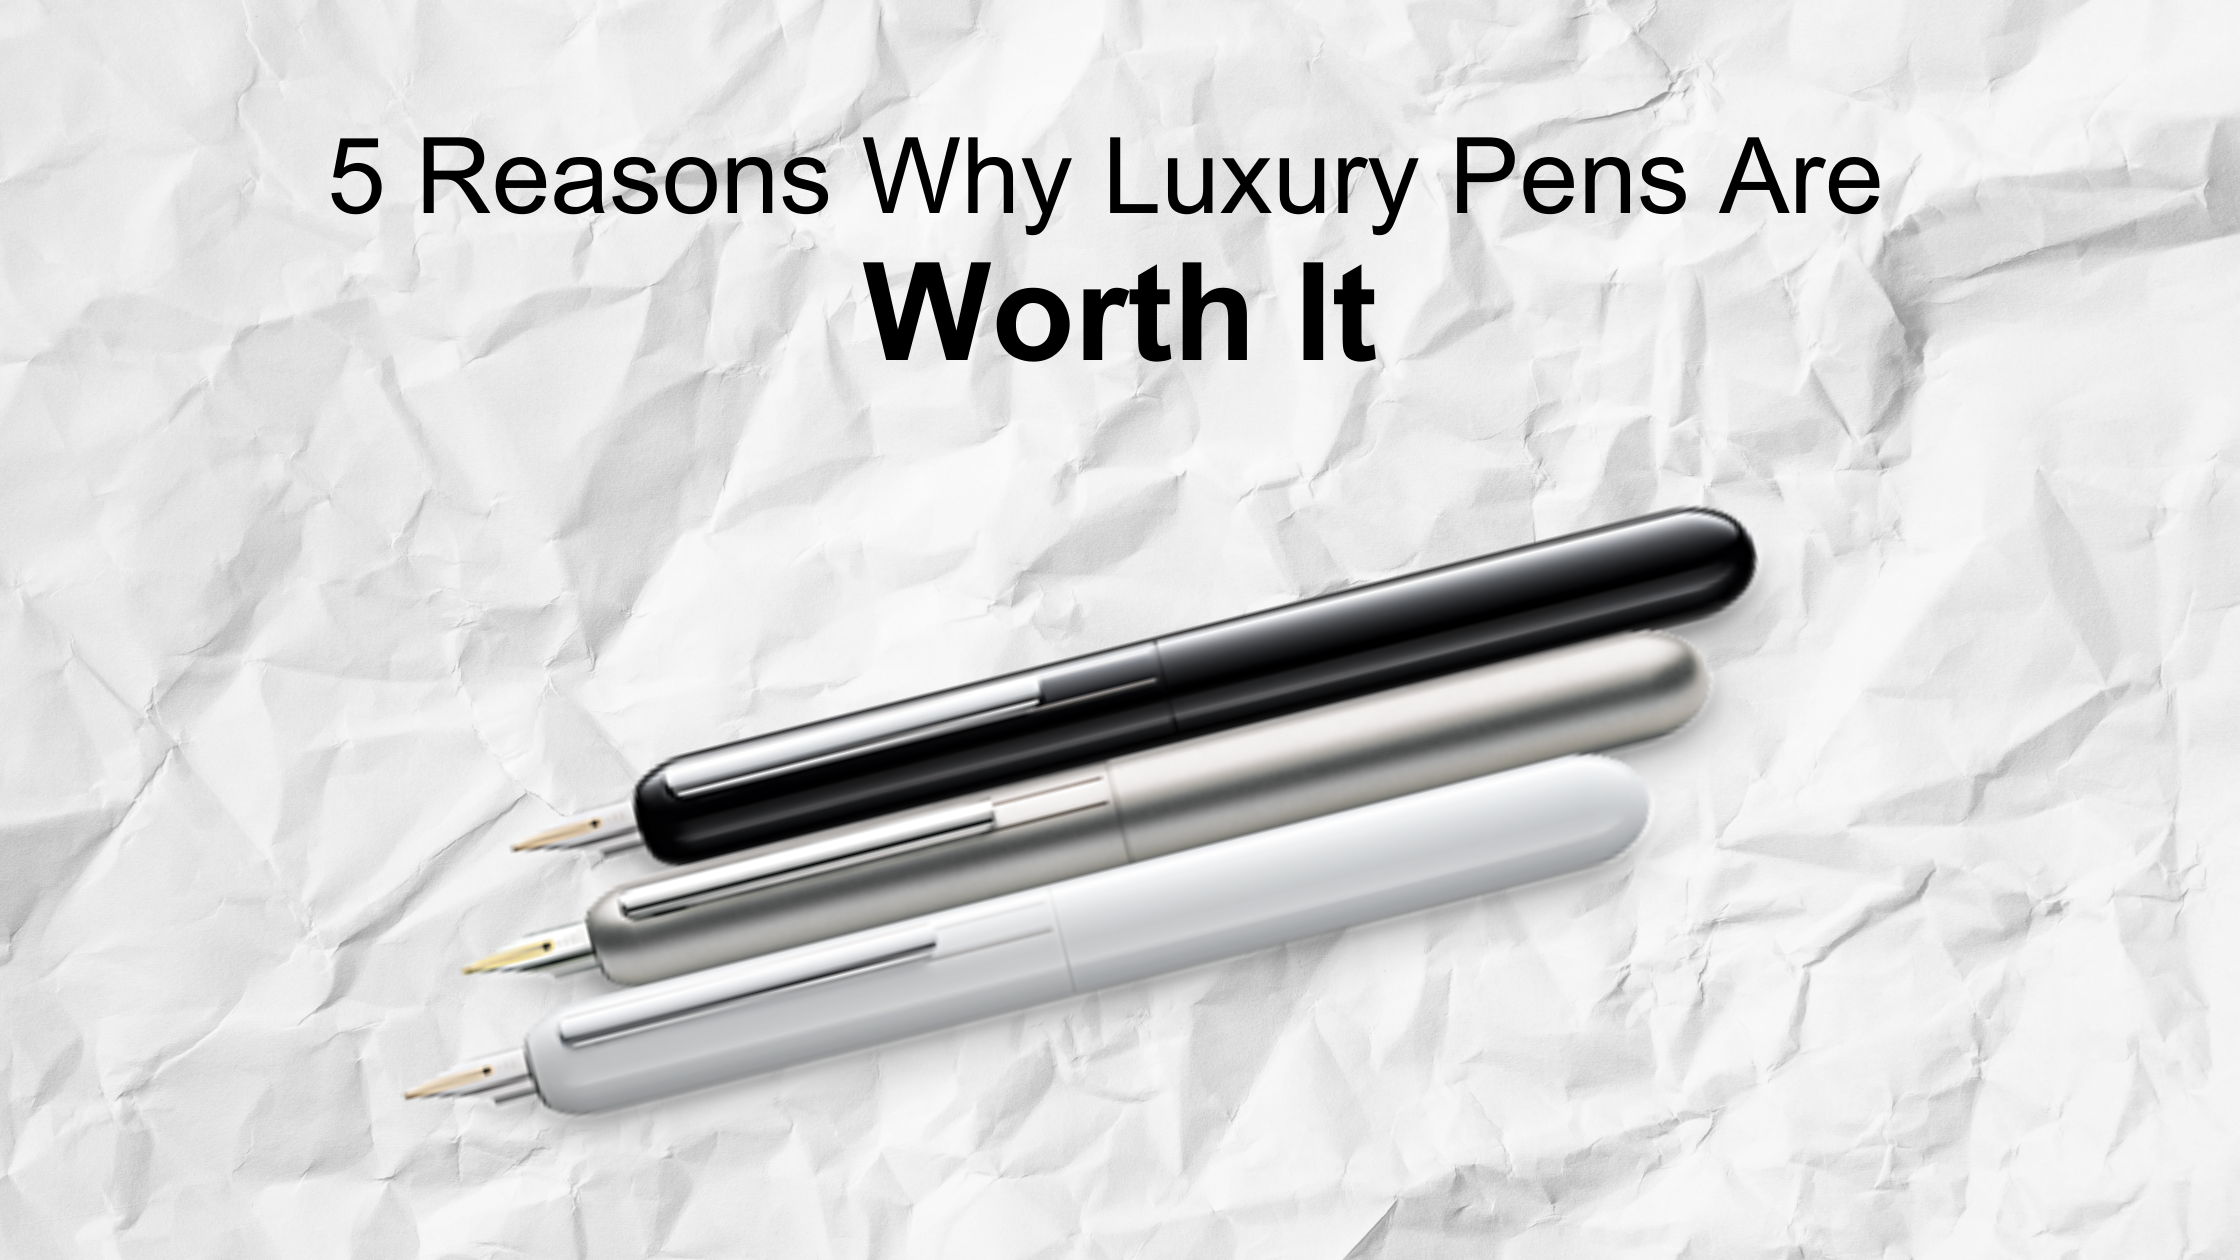 5 Reasons Why Luxury Pens Are Worth It